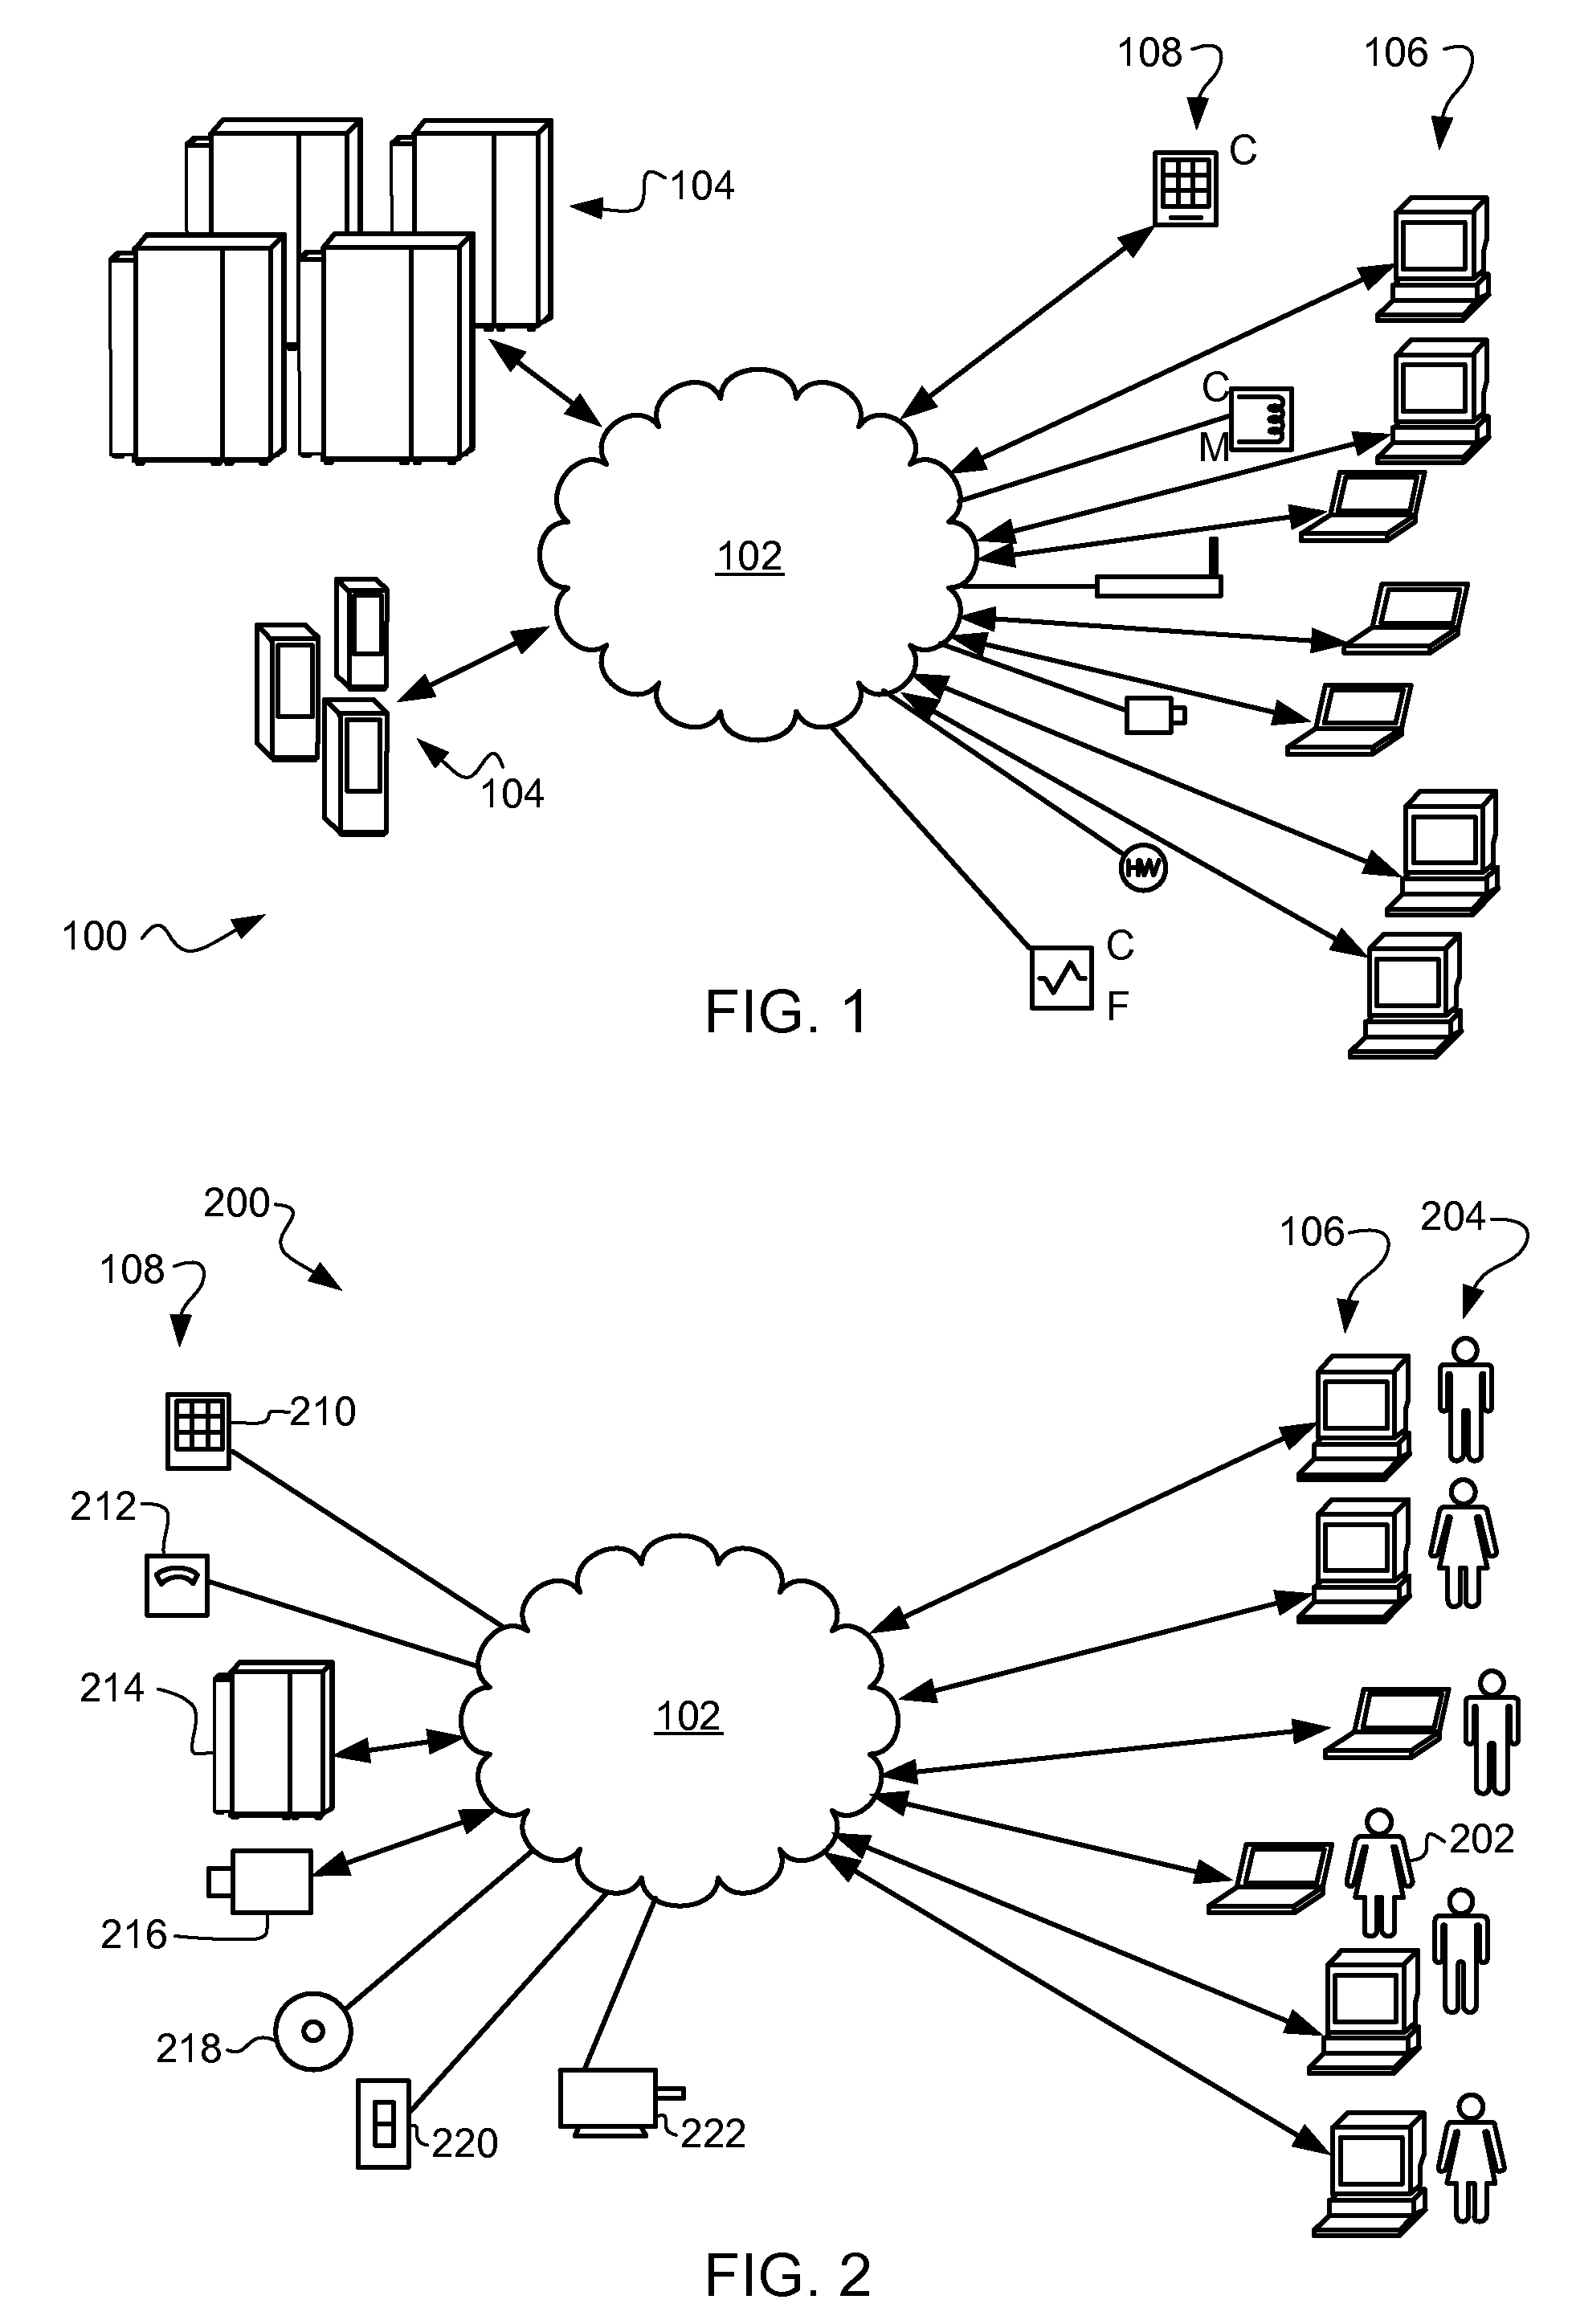 Device social-control system